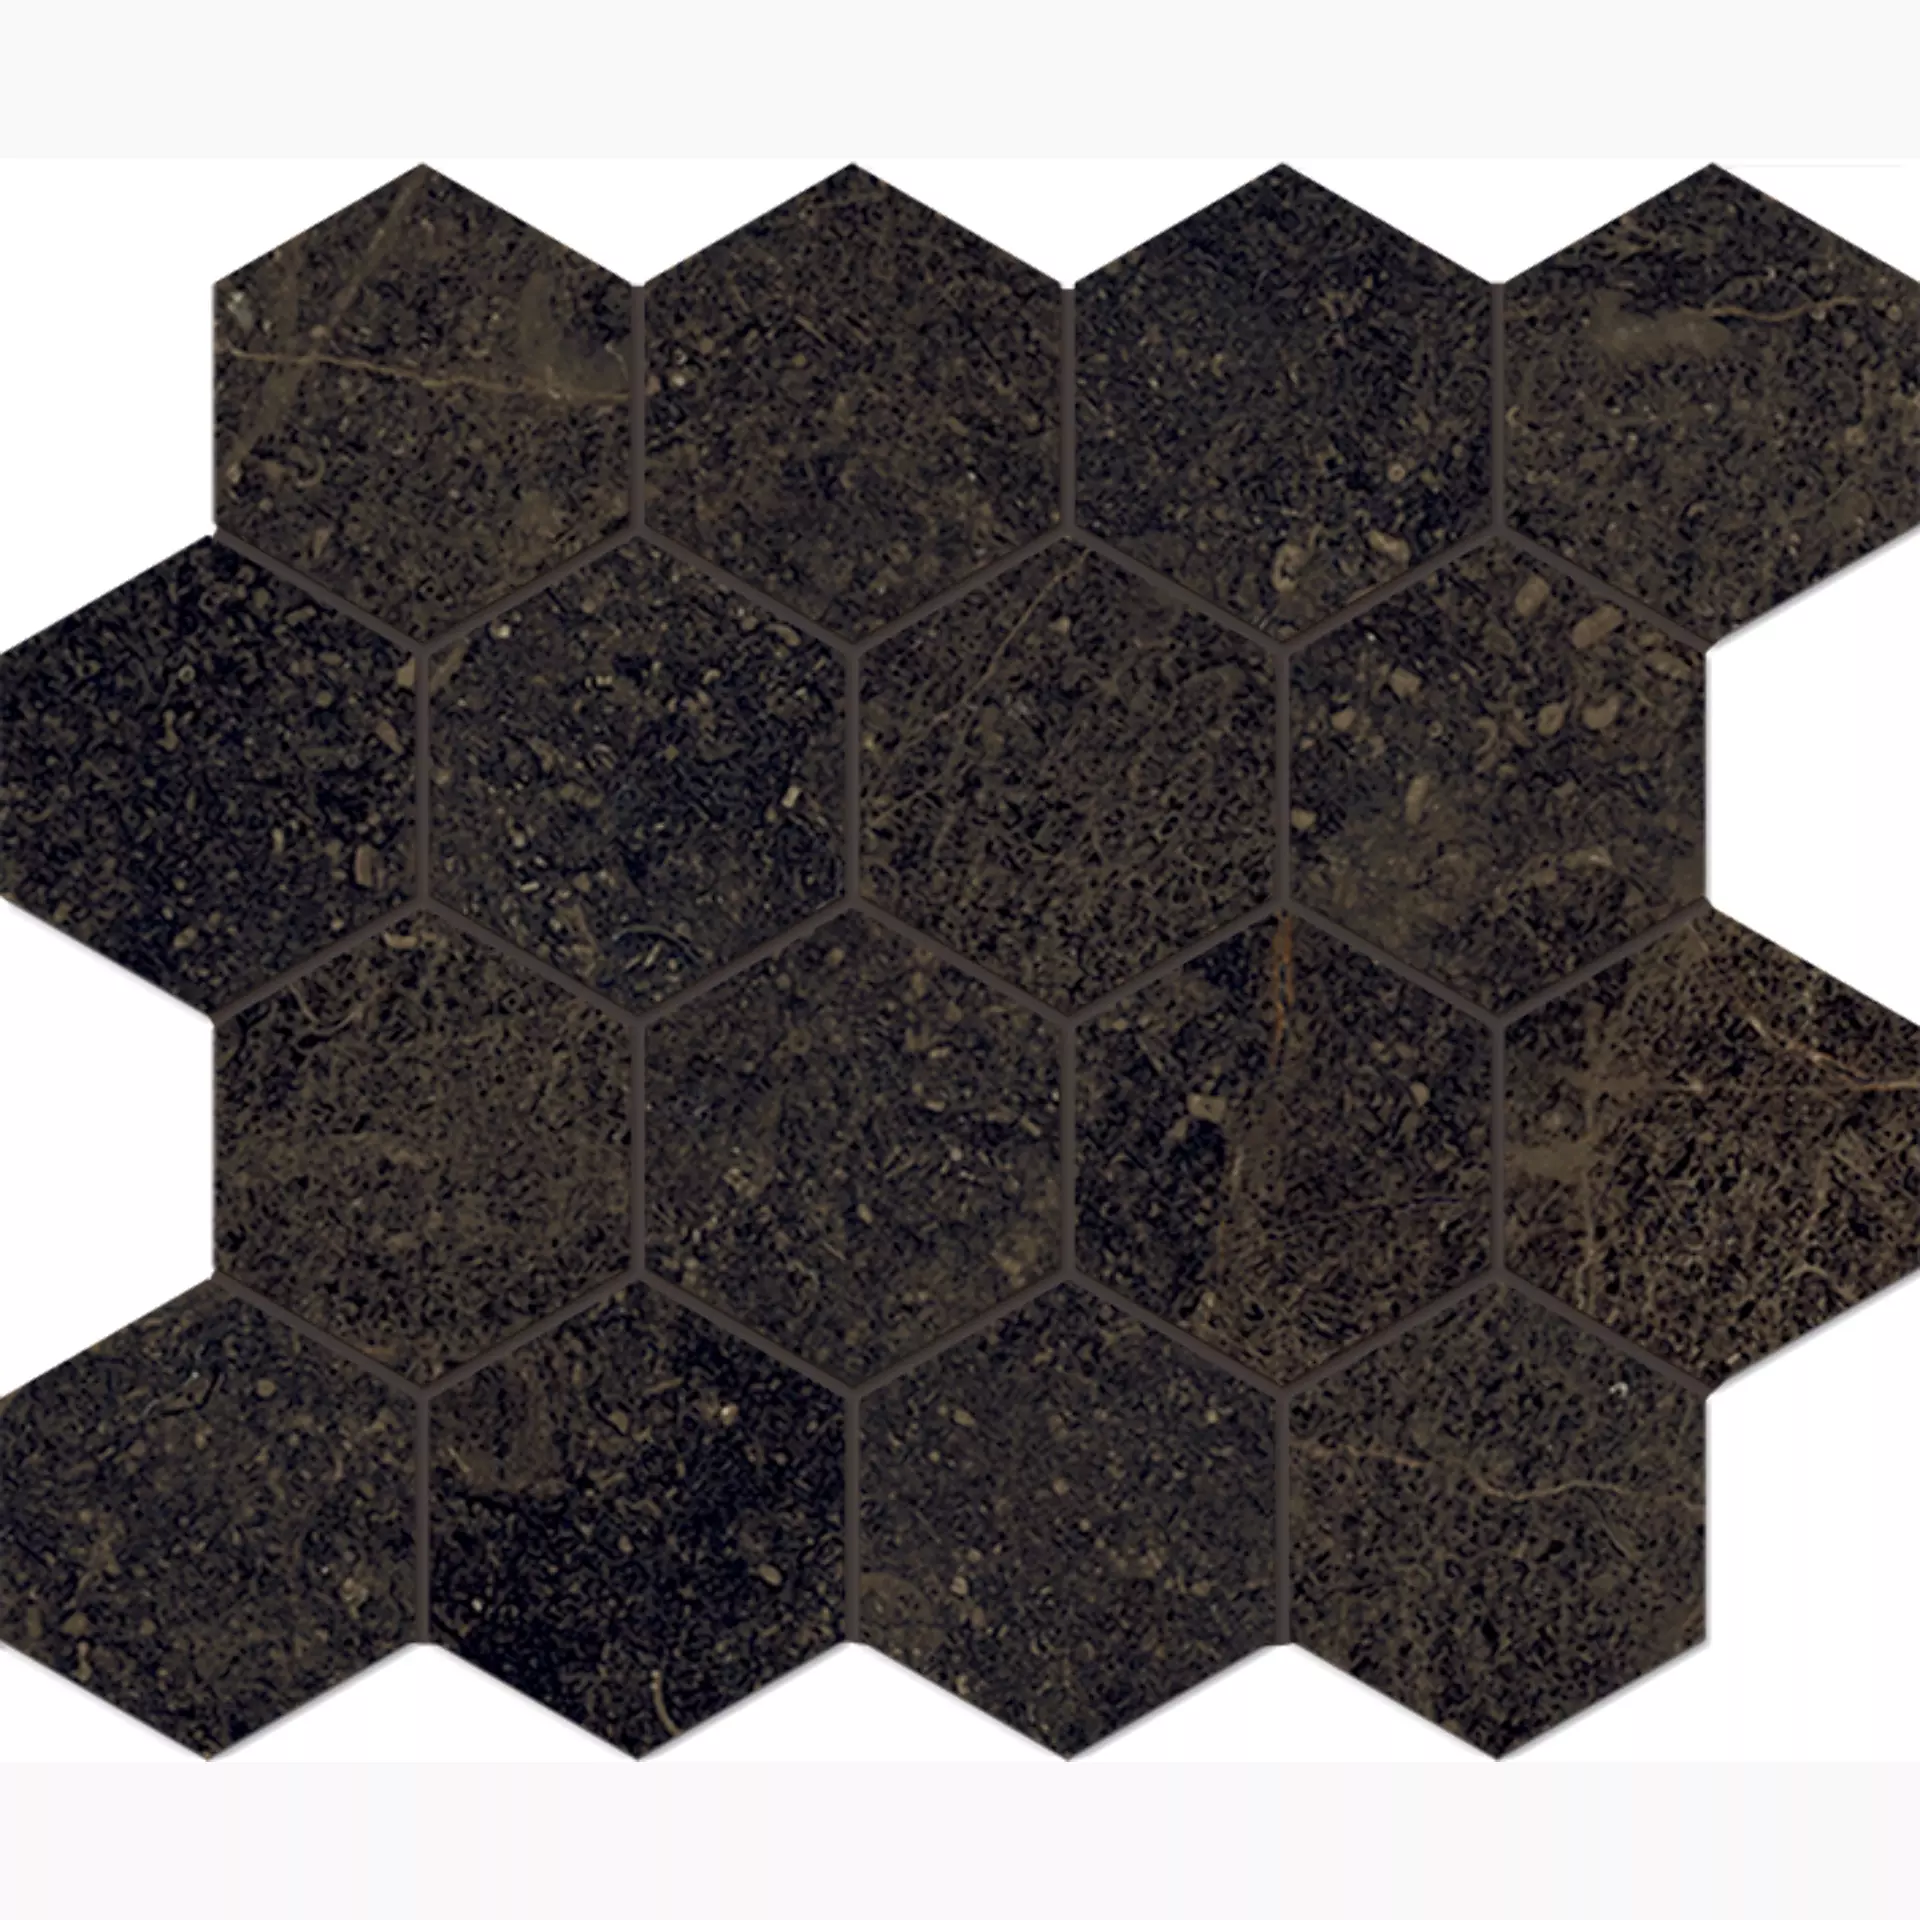 Fondovalle Planeto Pluto Natural Mosaic Hexagon PNT031A 26x30cm rectified 8,5mm